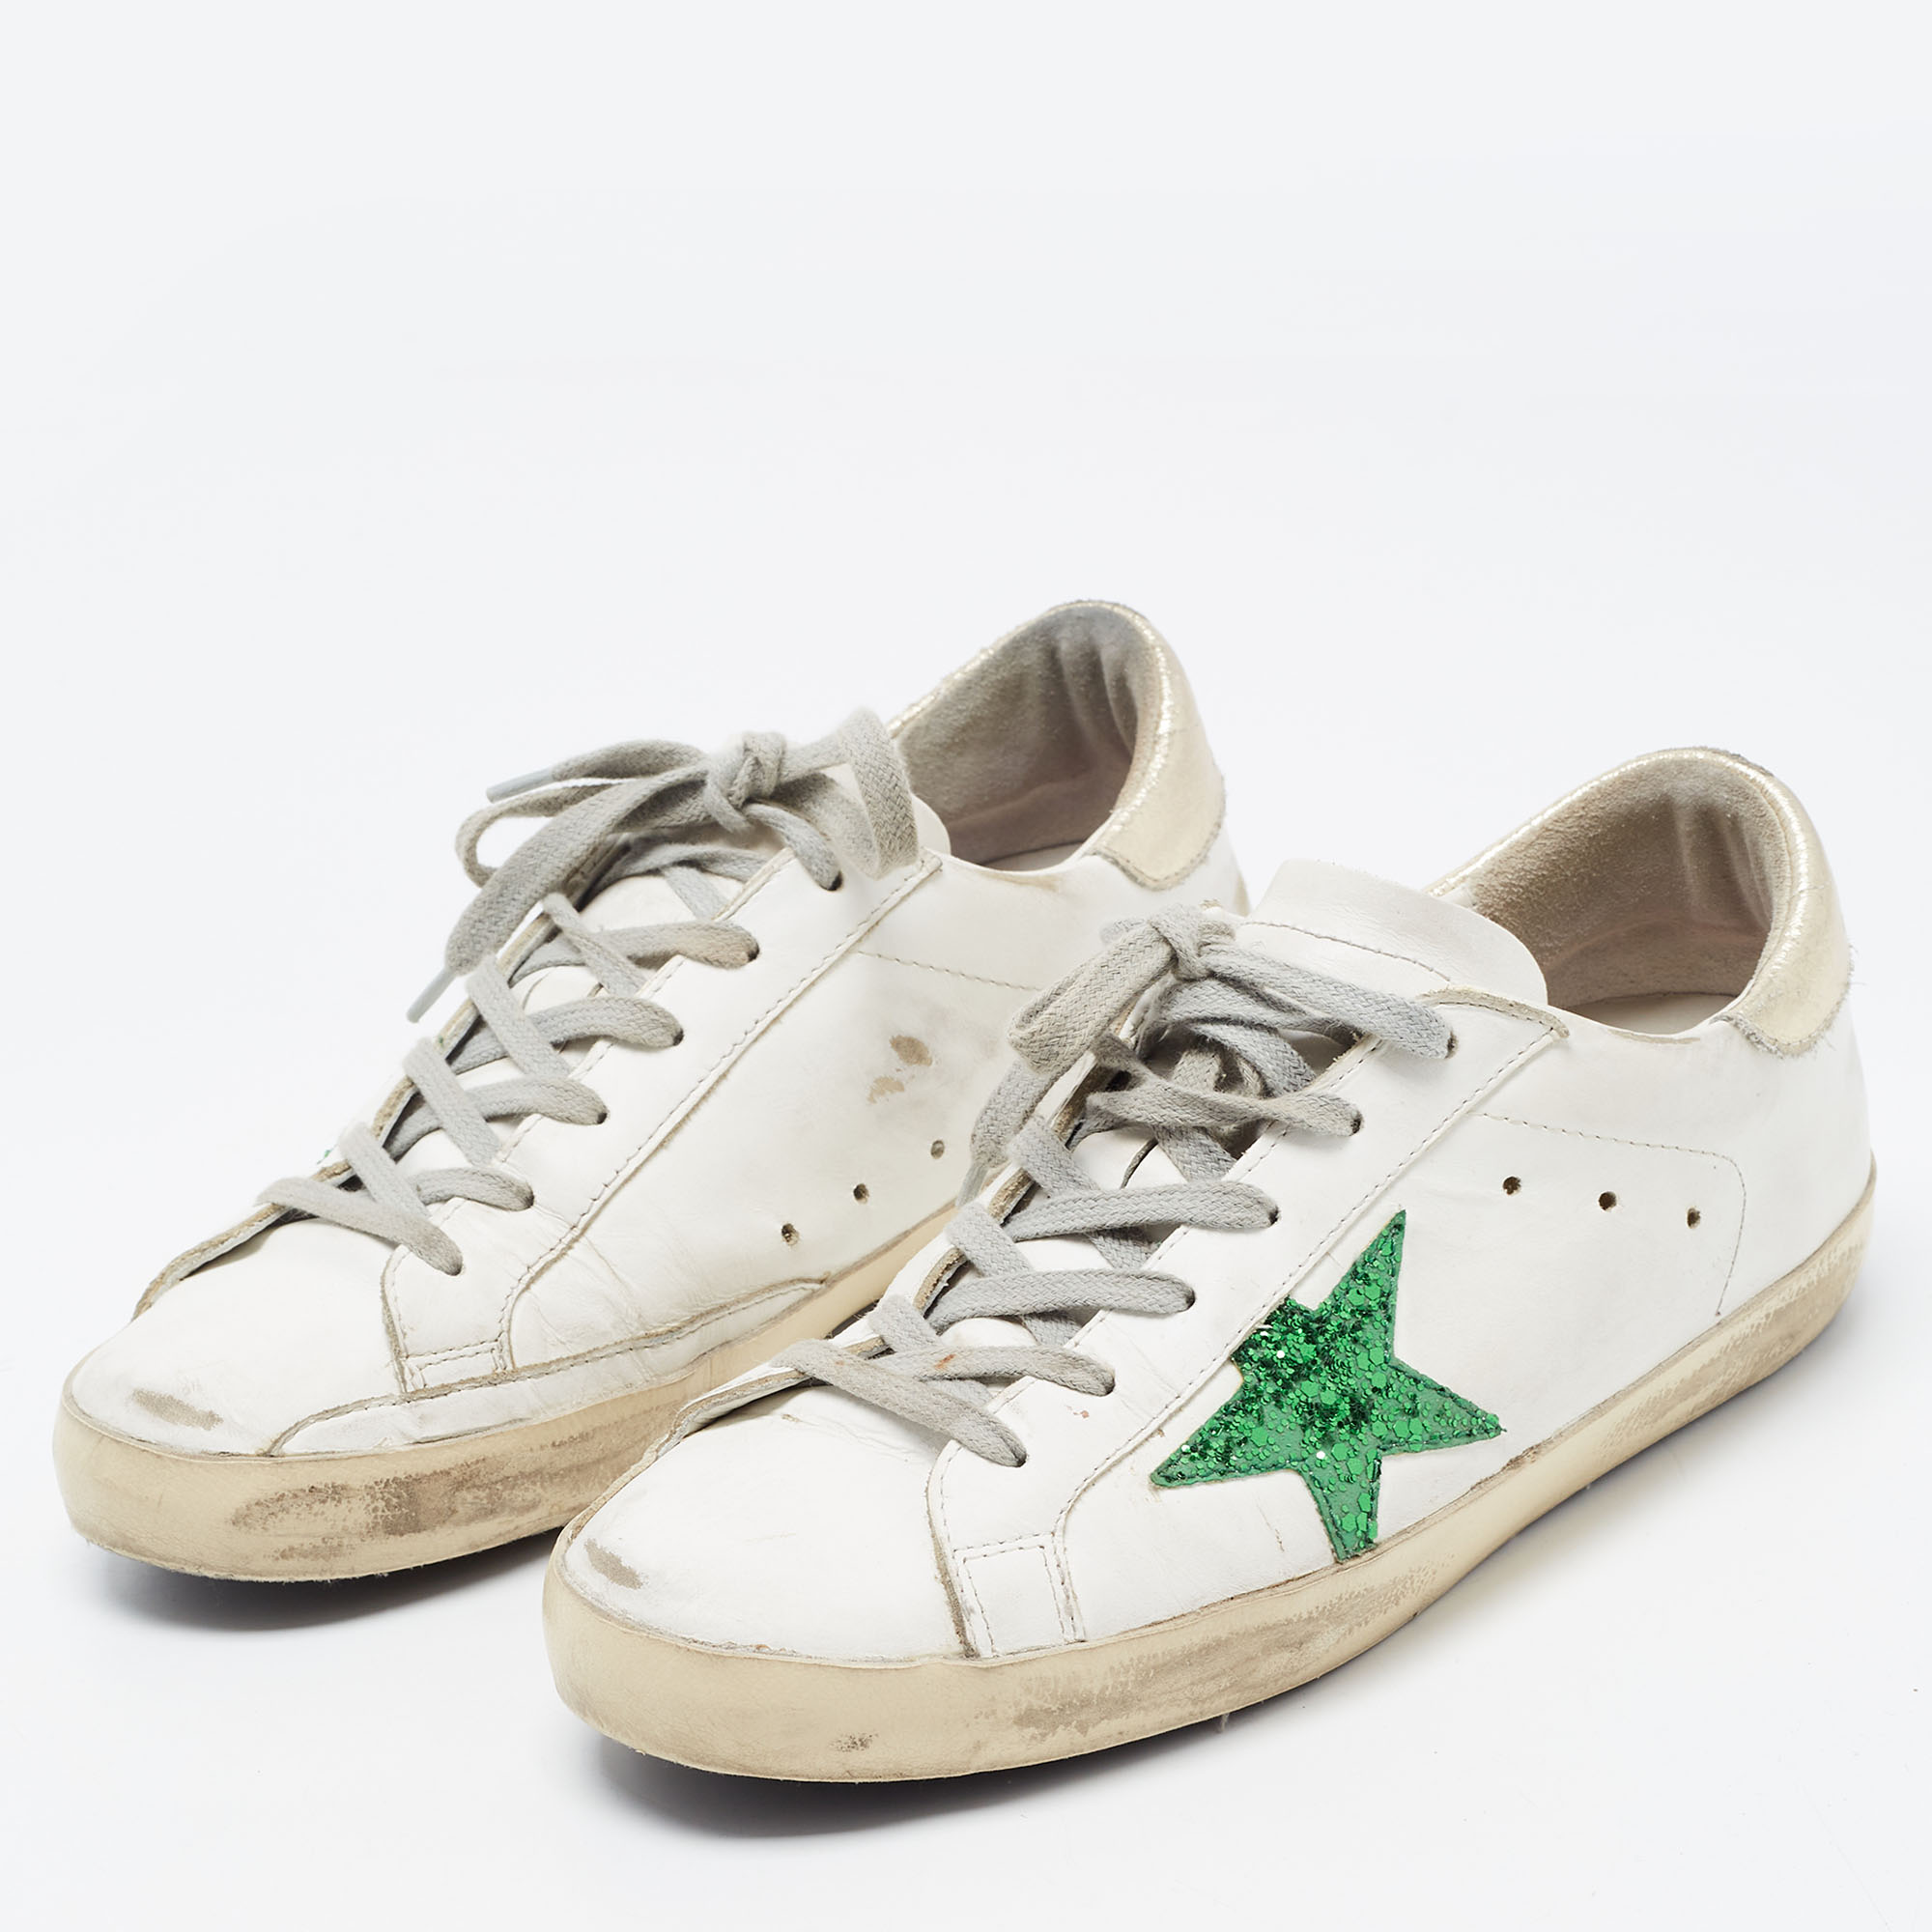 

Golden Goose White/Green Leather and Coarse Glitter Superstar Sneakers Size